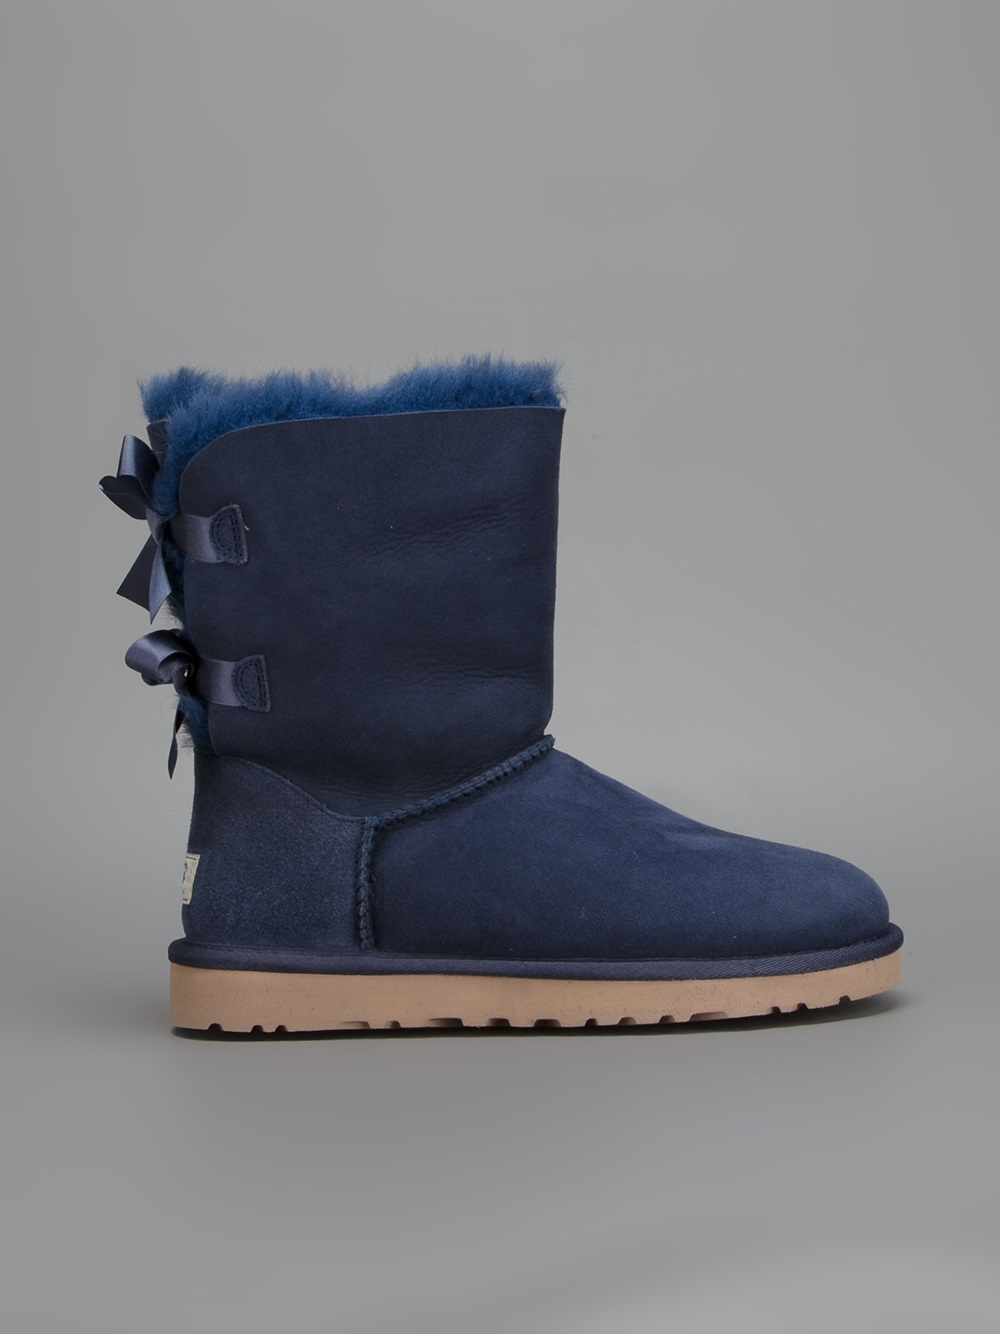 baby blue uggs with bows